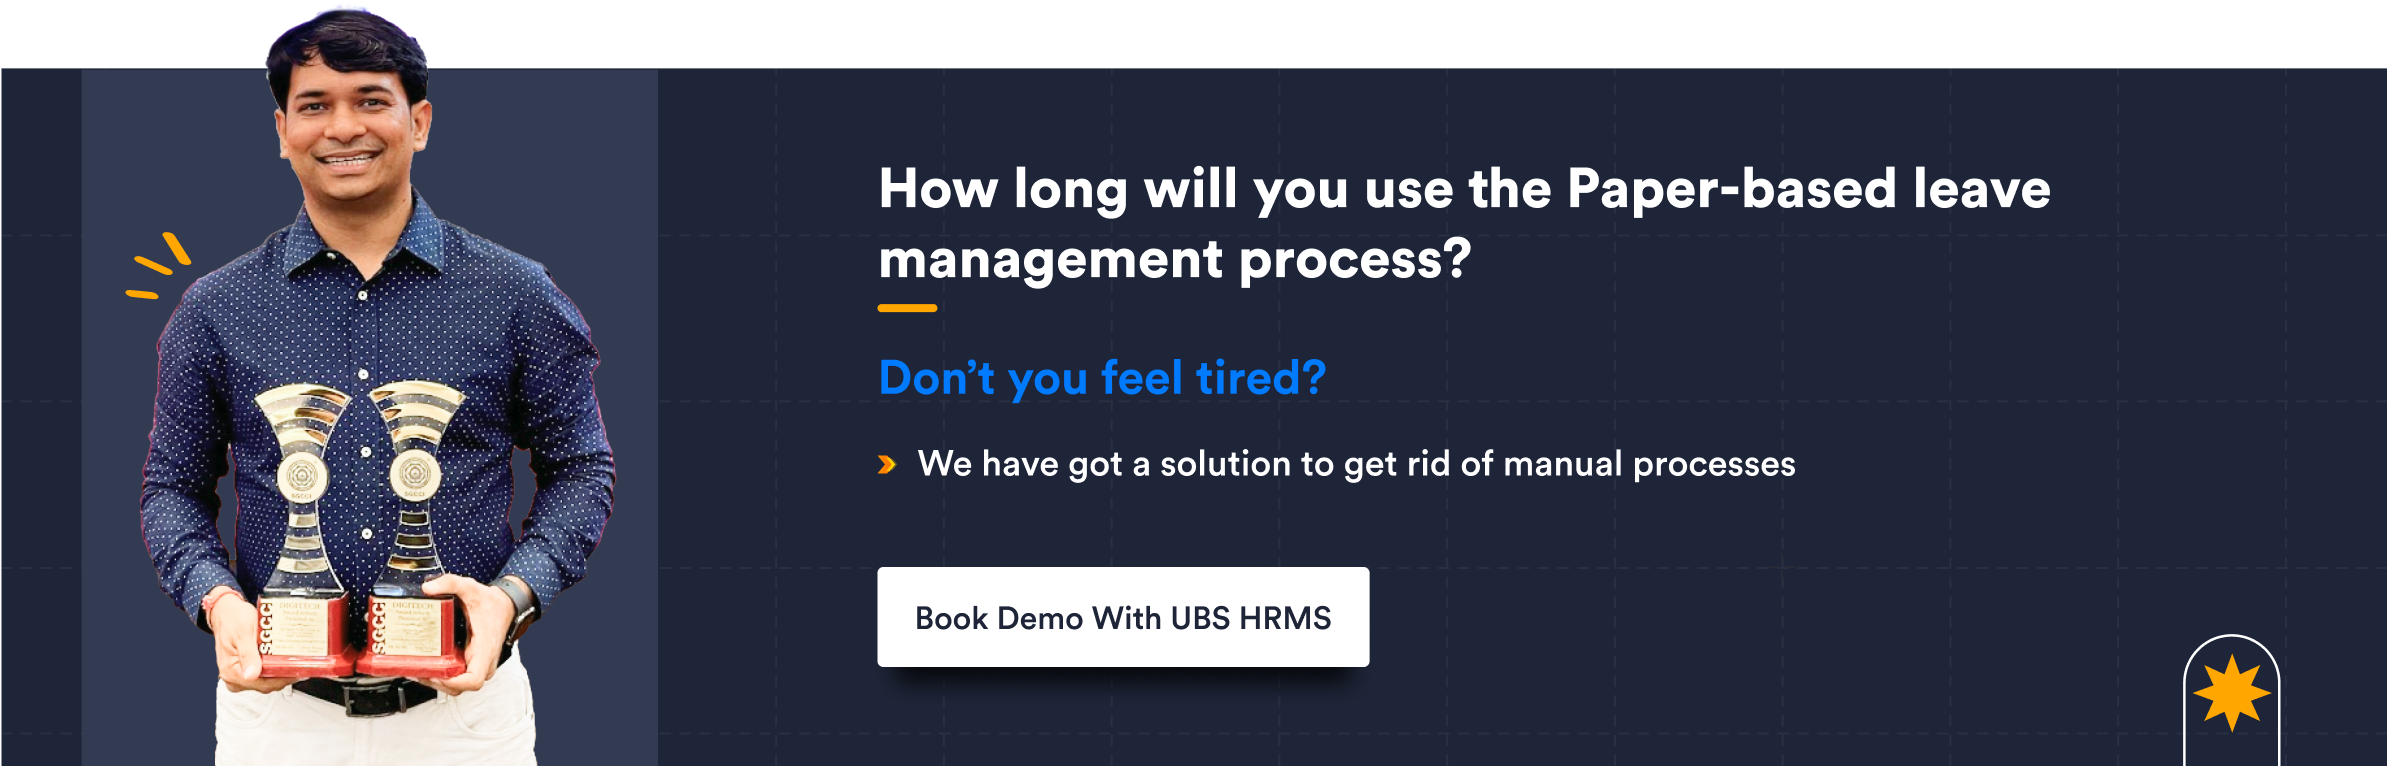 How long will you use the Paper based leave management process